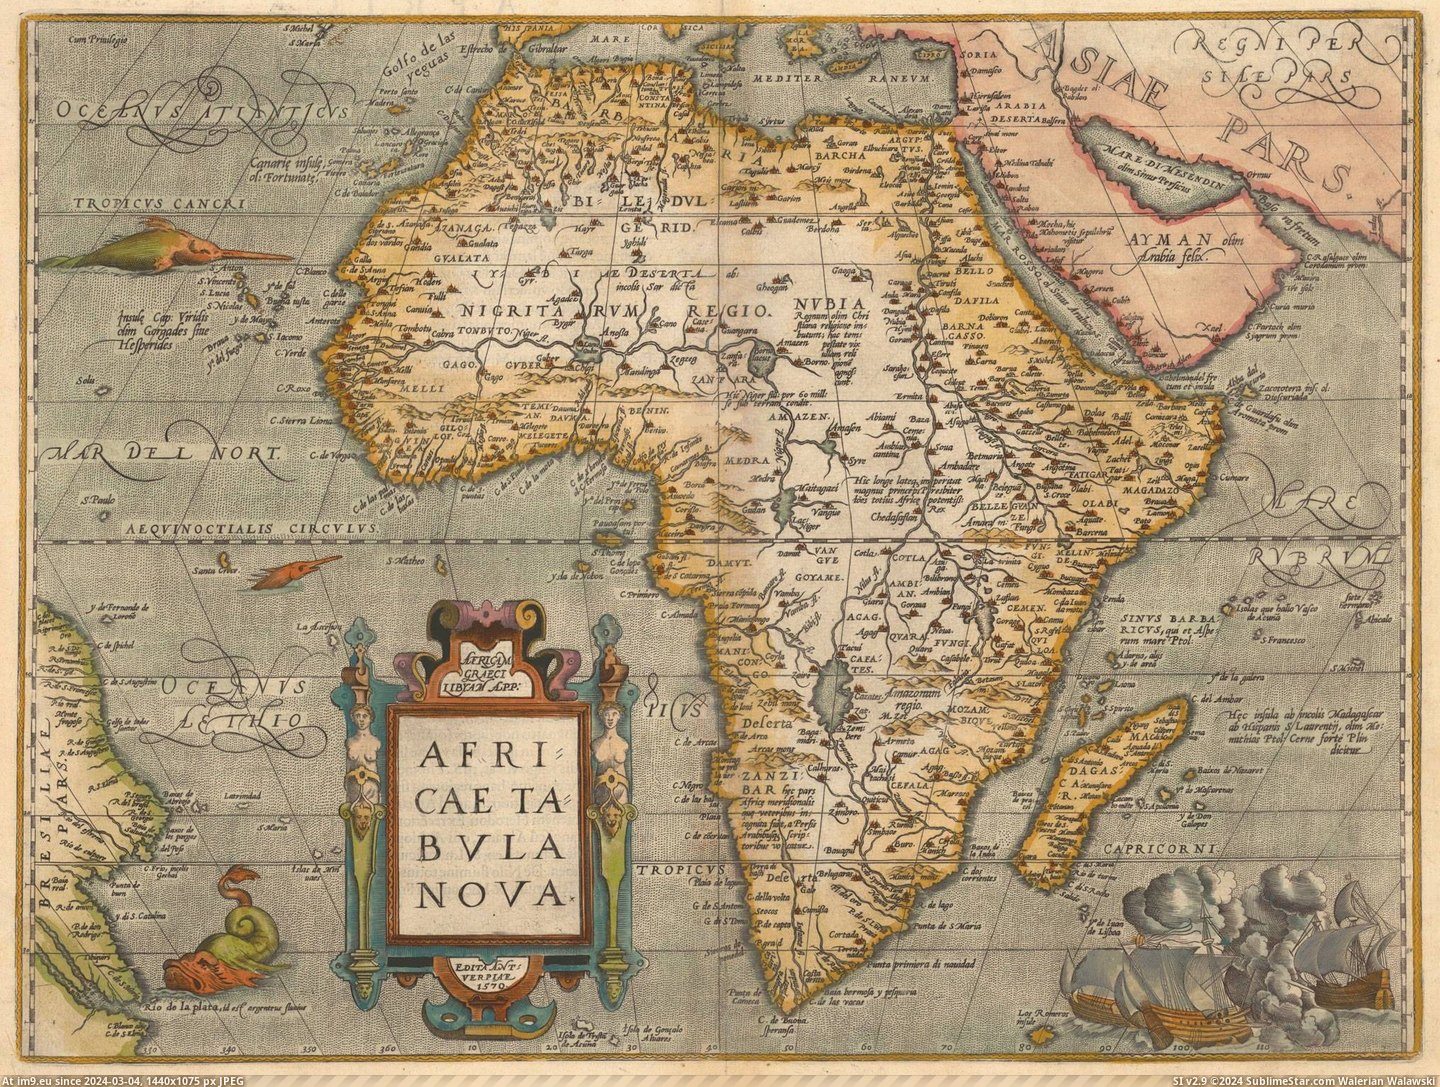 #Map #Abraham #Ortelius #Africa [Mapporn] 1584 map of Africa by Abraham Ortelius [2,031 x 1,528] Pic. (Image of album My r/MAPS favs))